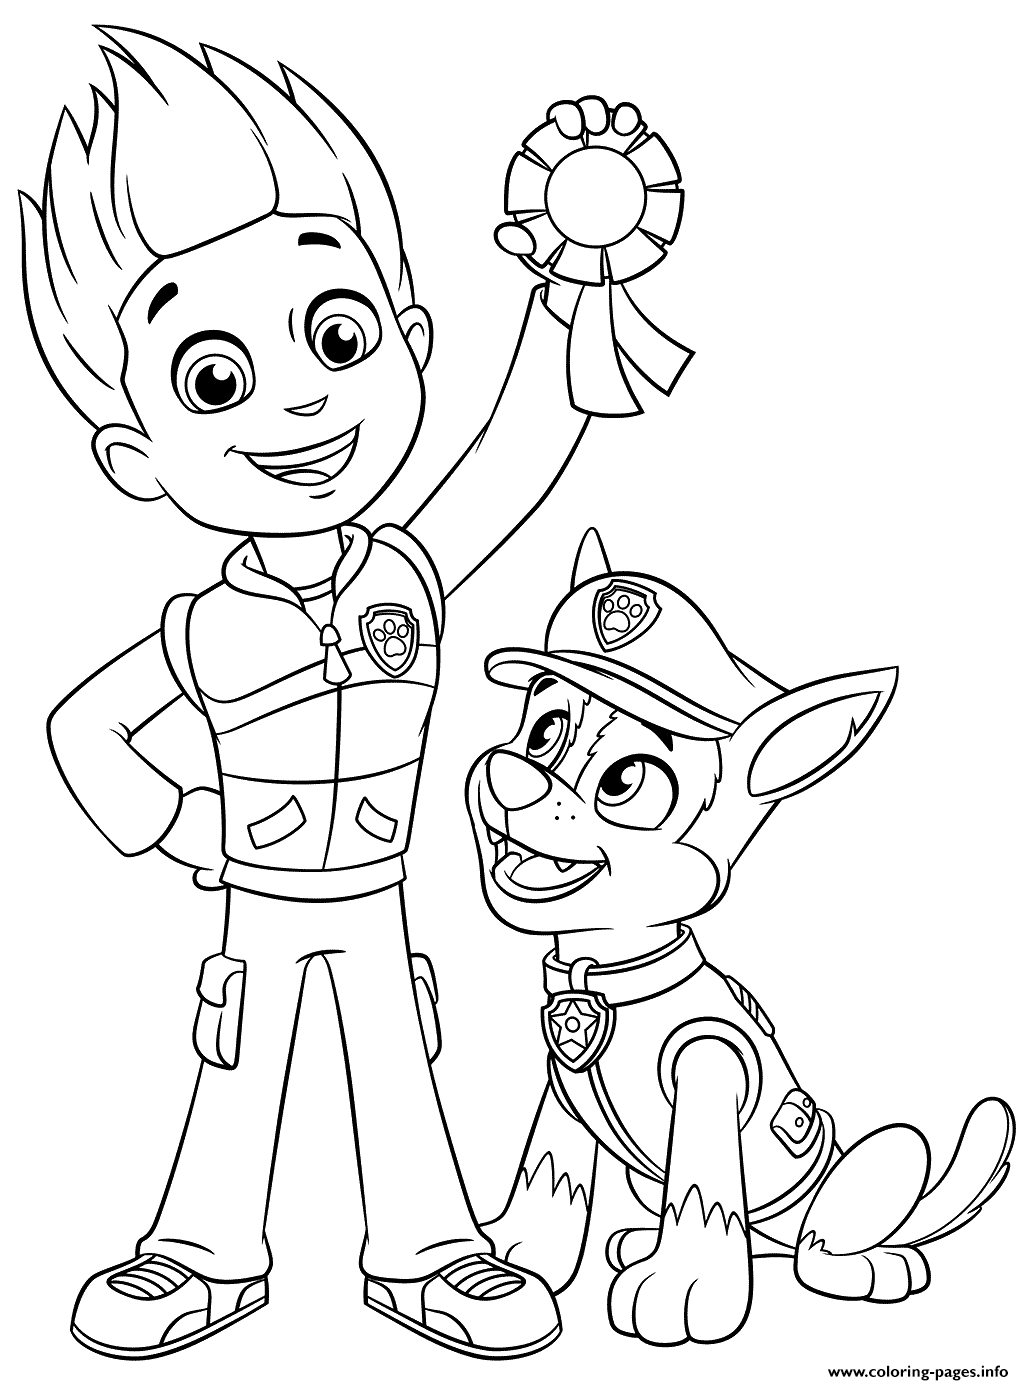 Chase Paw Patrol Coloring Pages Printable - Paw Patrol Colouring Pages